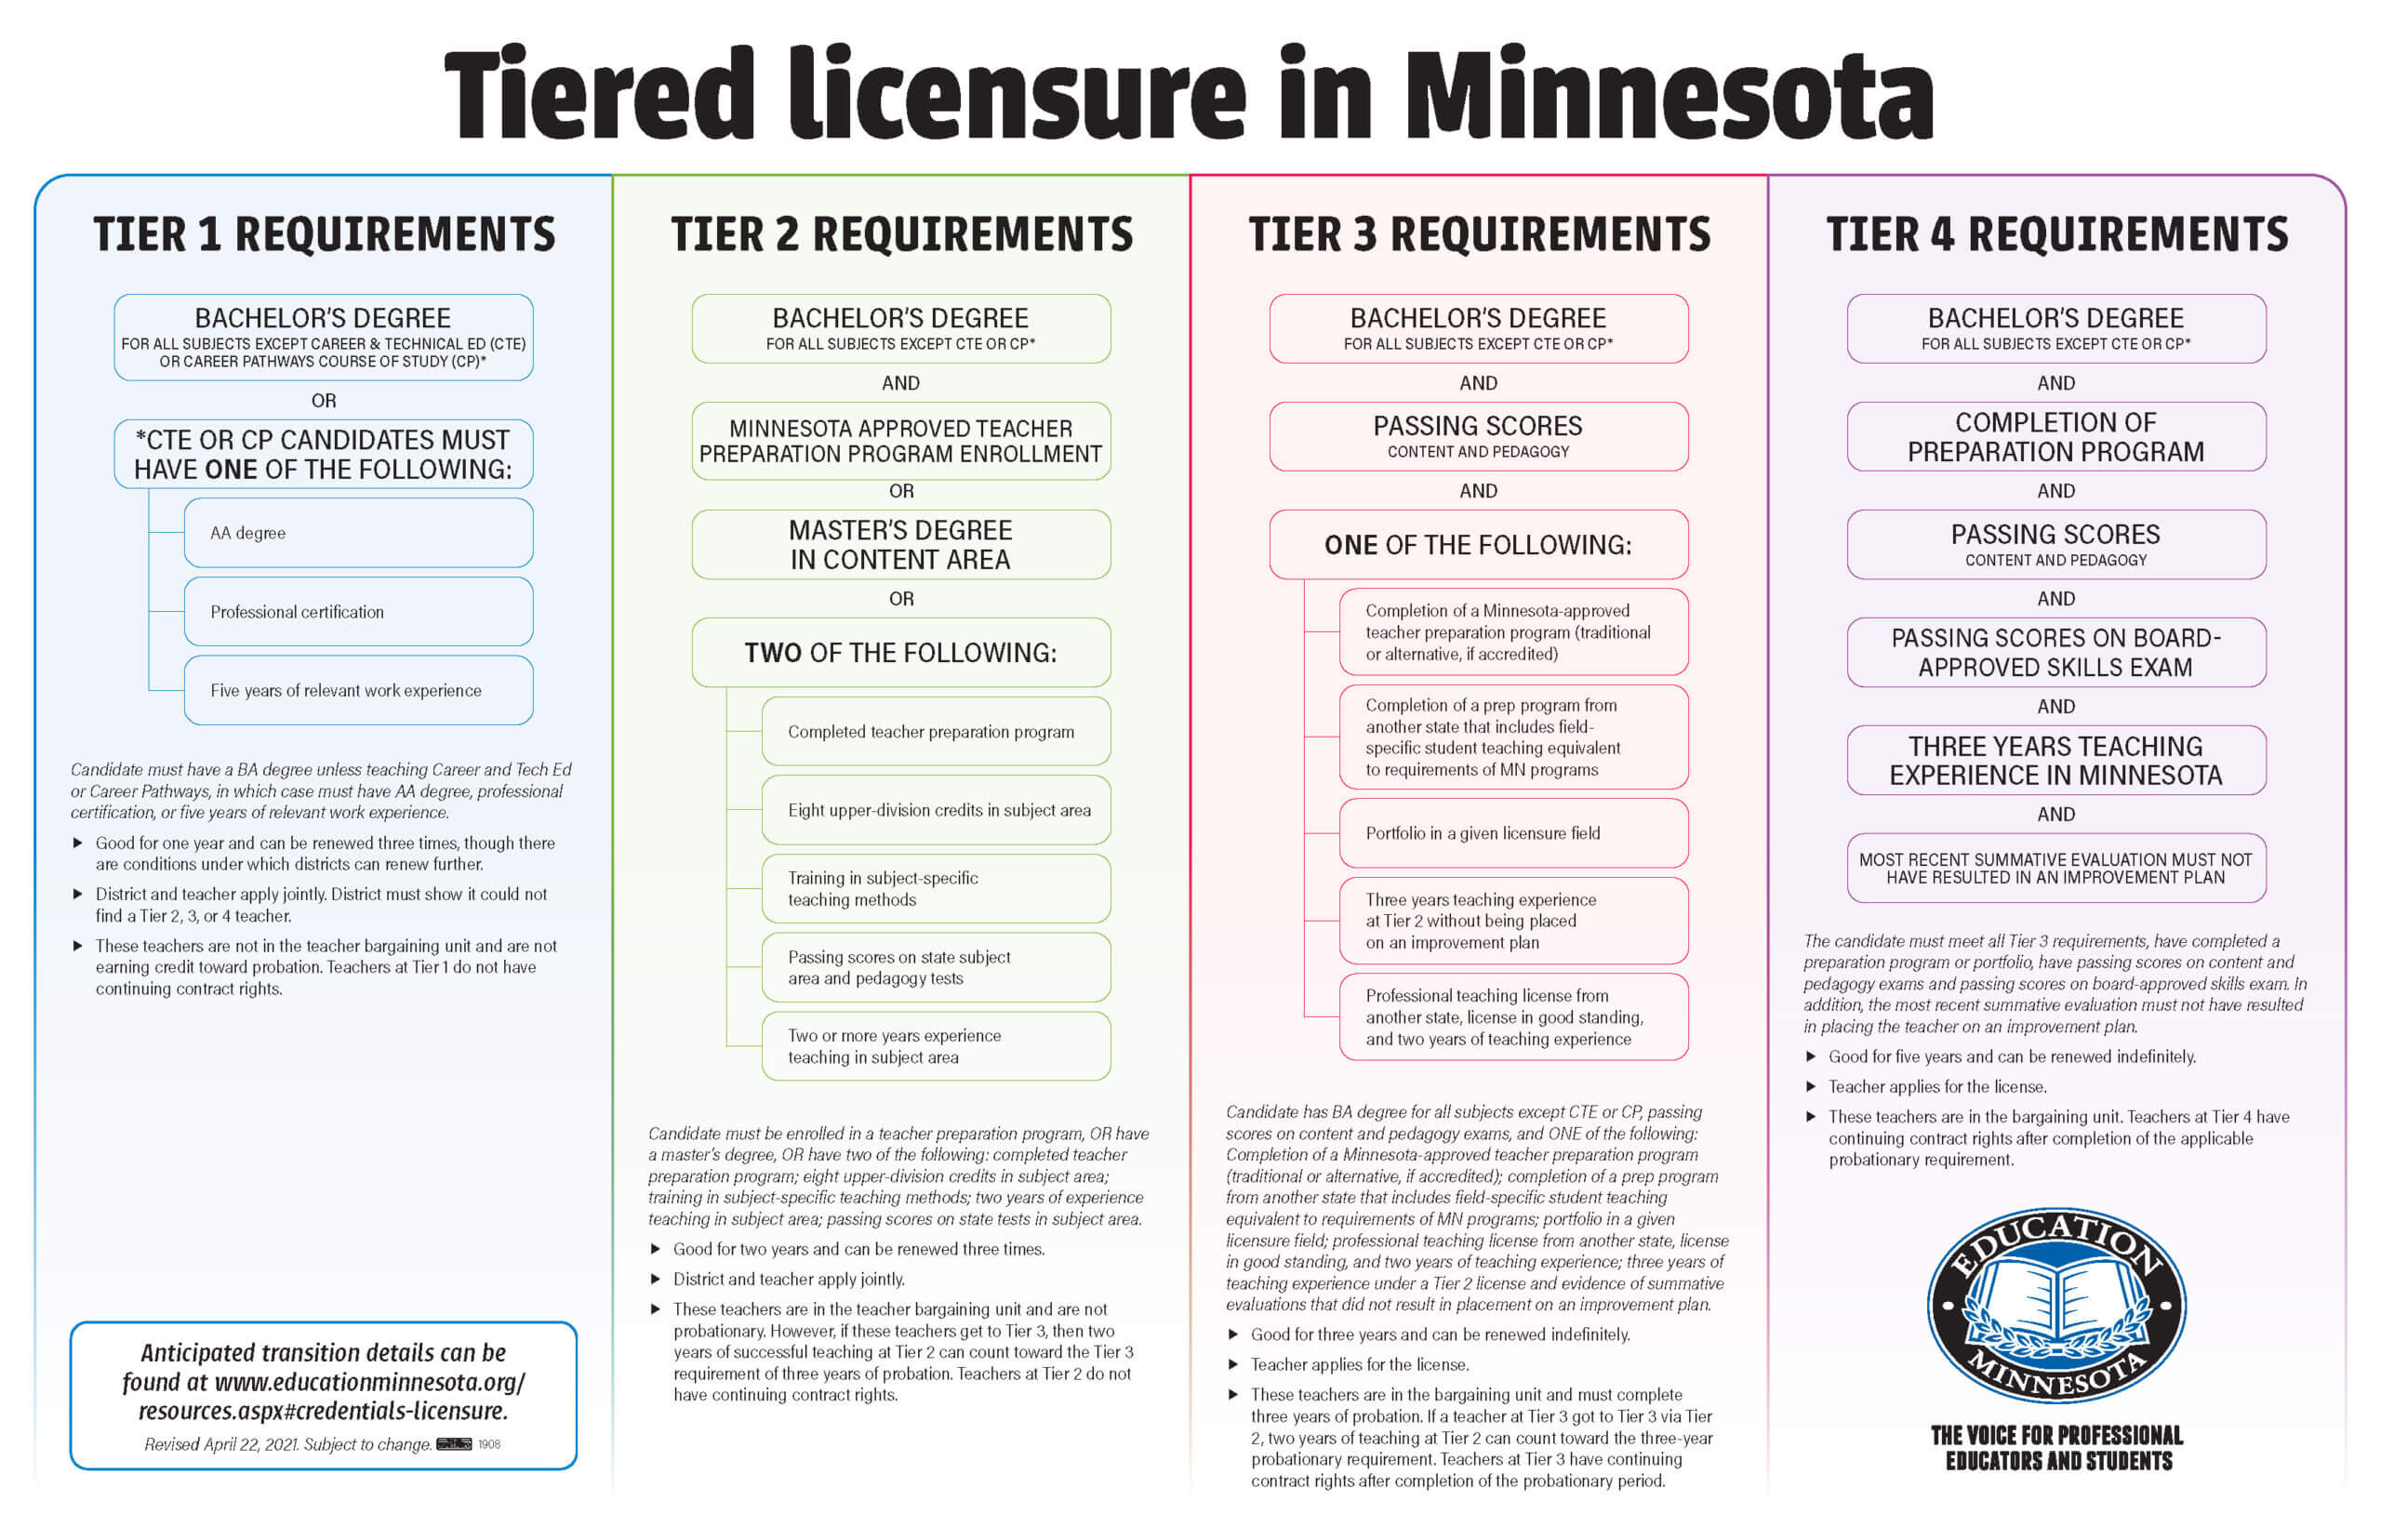 Licensure and credentials - Education Minnesota